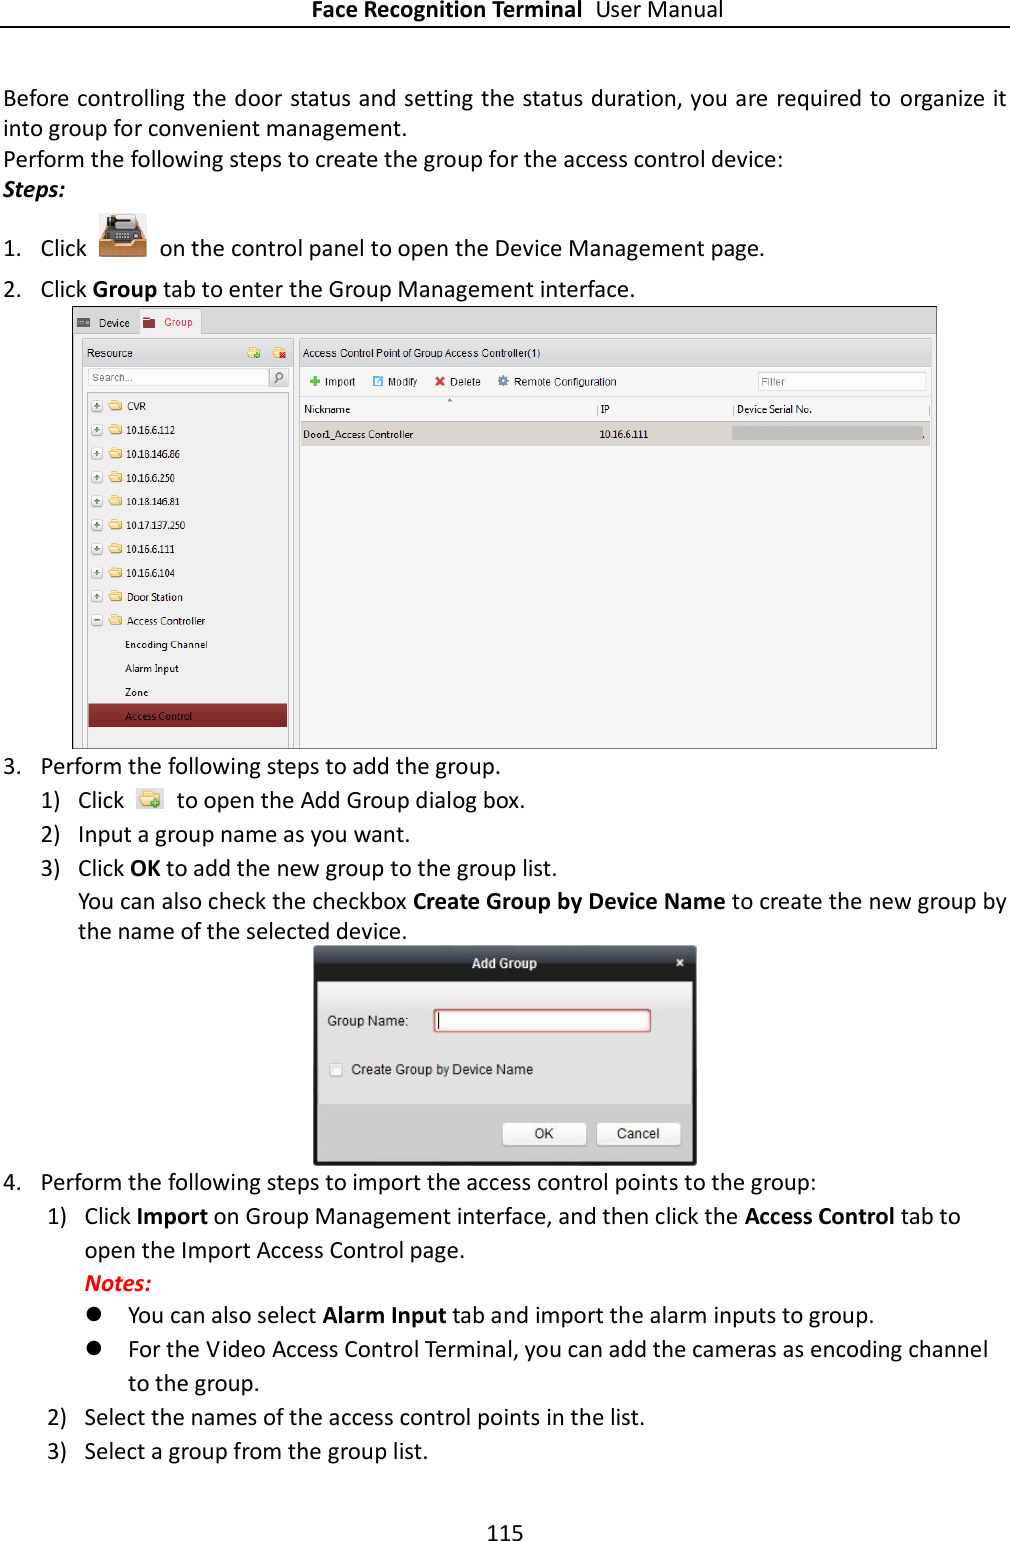 Face Recognition Terminal User Manual 115  Before controlling the door status and setting the status duration, you are required to  organize it into group for convenient management.   Perform the following steps to create the group for the access control device: Steps: 1. Click    on the control panel to open the Device Management page. 2. Click Group tab to enter the Group Management interface.  3. Perform the following steps to add the group. 1) Click    to open the Add Group dialog box. 2) Input a group name as you want. 3) Click OK to add the new group to the group list. You can also check the checkbox Create Group by Device Name to create the new group by the name of the selected device.  4. Perform the following steps to import the access control points to the group: 1) Click Import on Group Management interface, and then click the Access Control tab to open the Import Access Control page. Notes:    You can also select Alarm Input tab and import the alarm inputs to group.  For the Video Access Control Terminal, you can add the cameras as encoding channel to the group. 2) Select the names of the access control points in the list. 3) Select a group from the group list. 